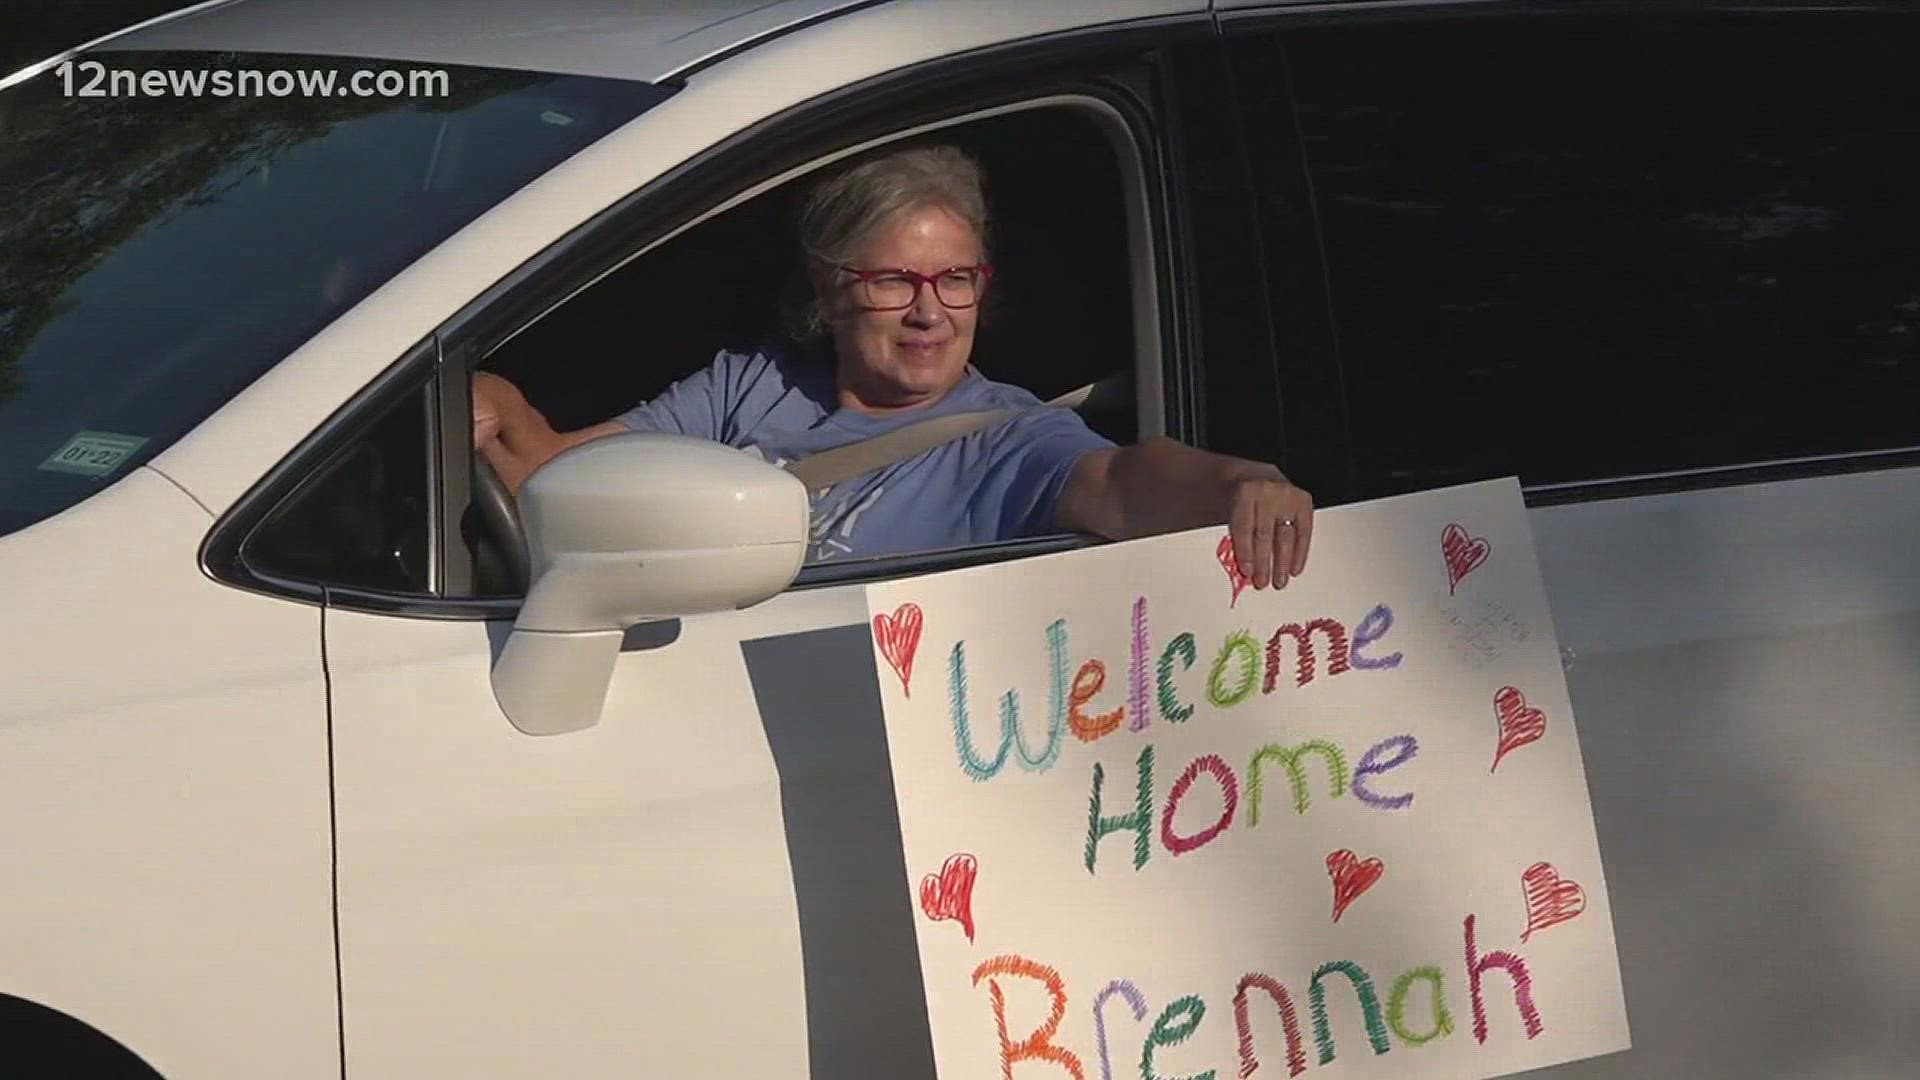 Tuesday evening, the Buna community rallied to welcome home 11-year-old Brennah Gurganious.